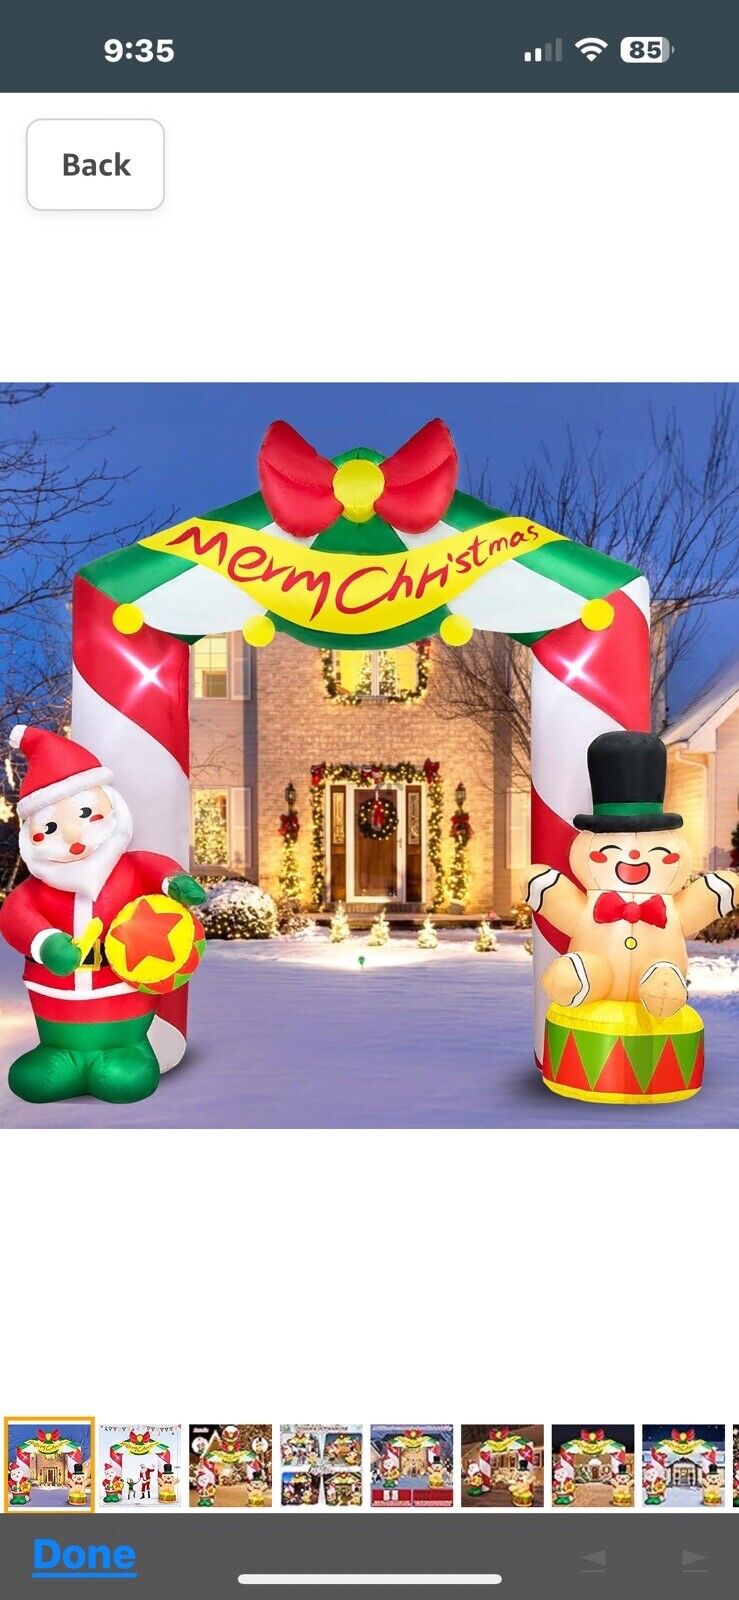 10 FT Christmas Inflatable Archway Santa Gingerbread Outdoor Decorations LED LIT